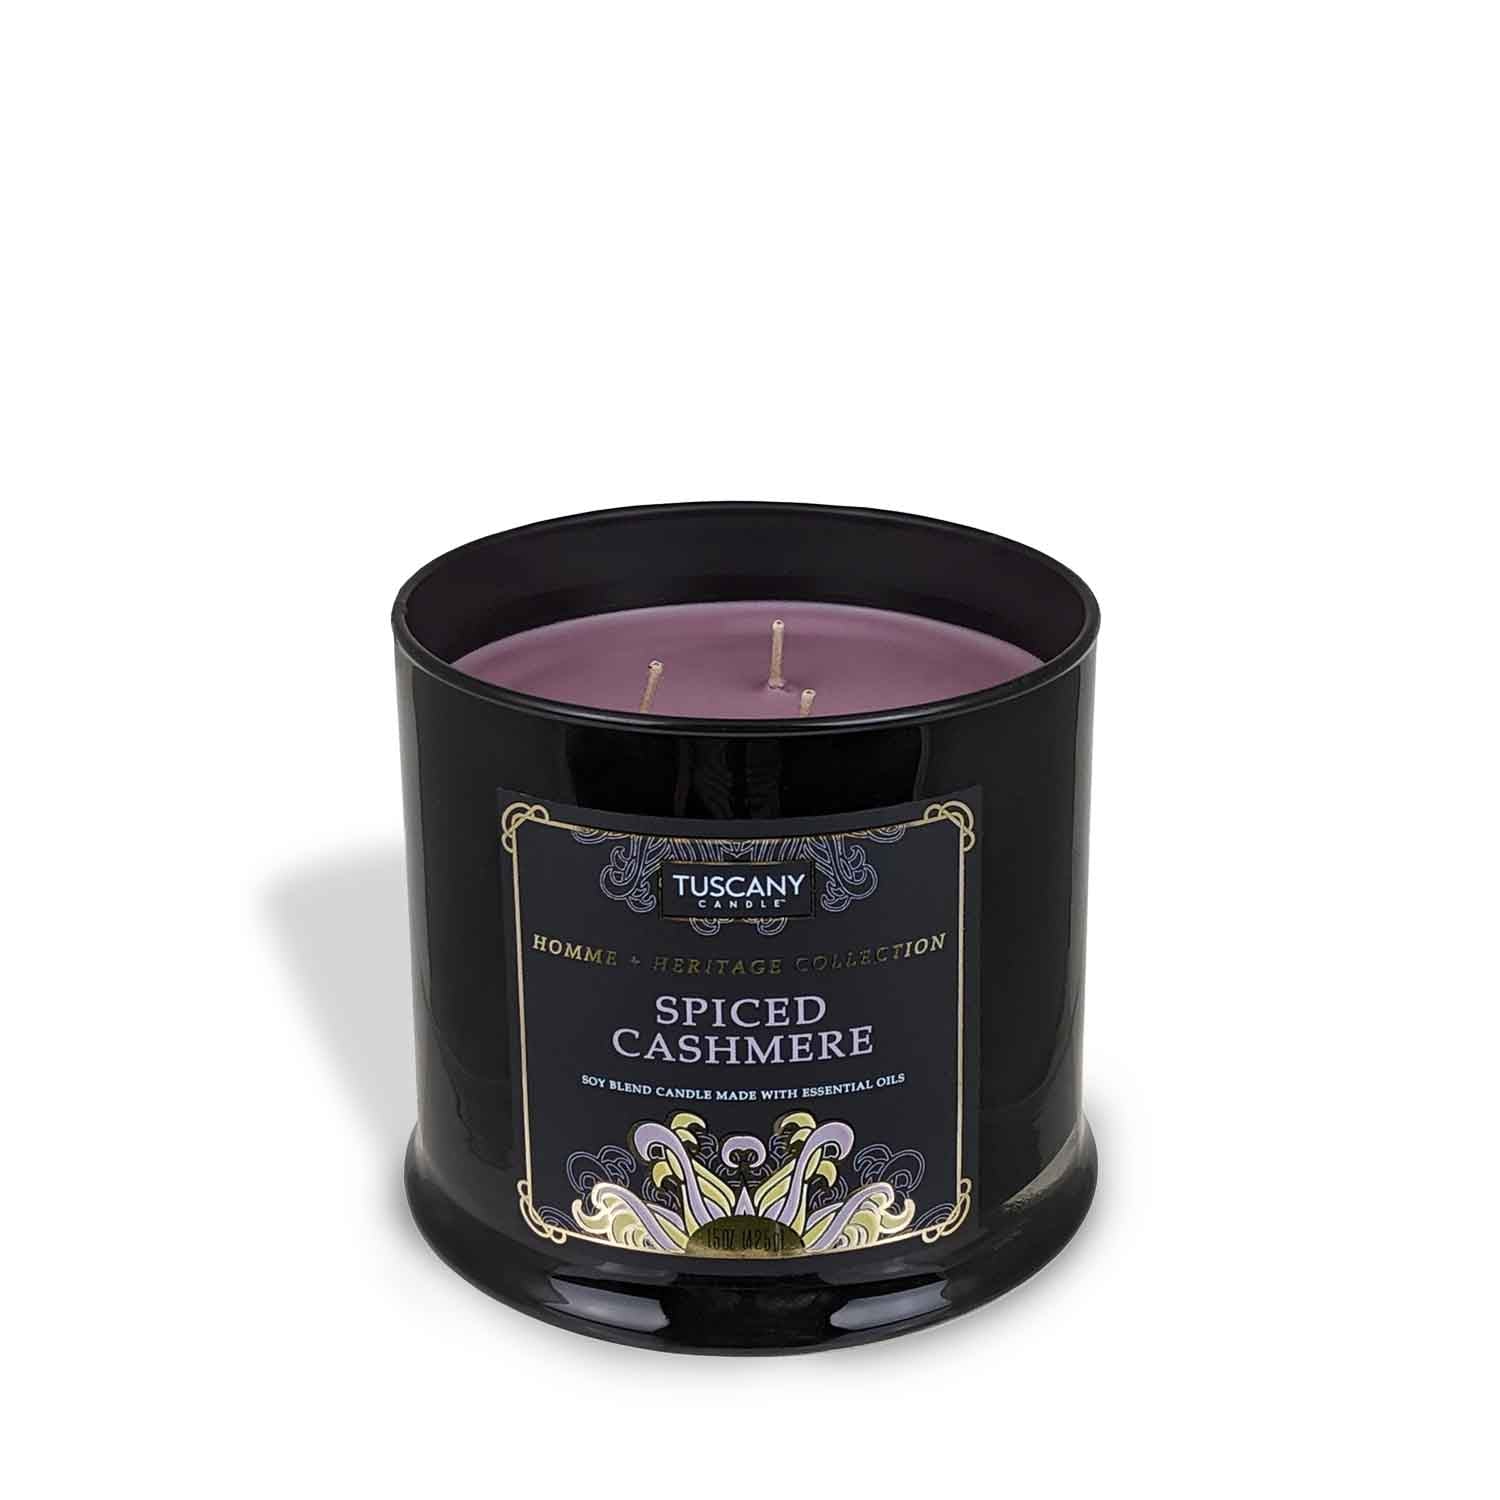 Spiced Cashmere scented candle with a touch of elegance from the Tuscany Candle Homme + Heritage Collection.